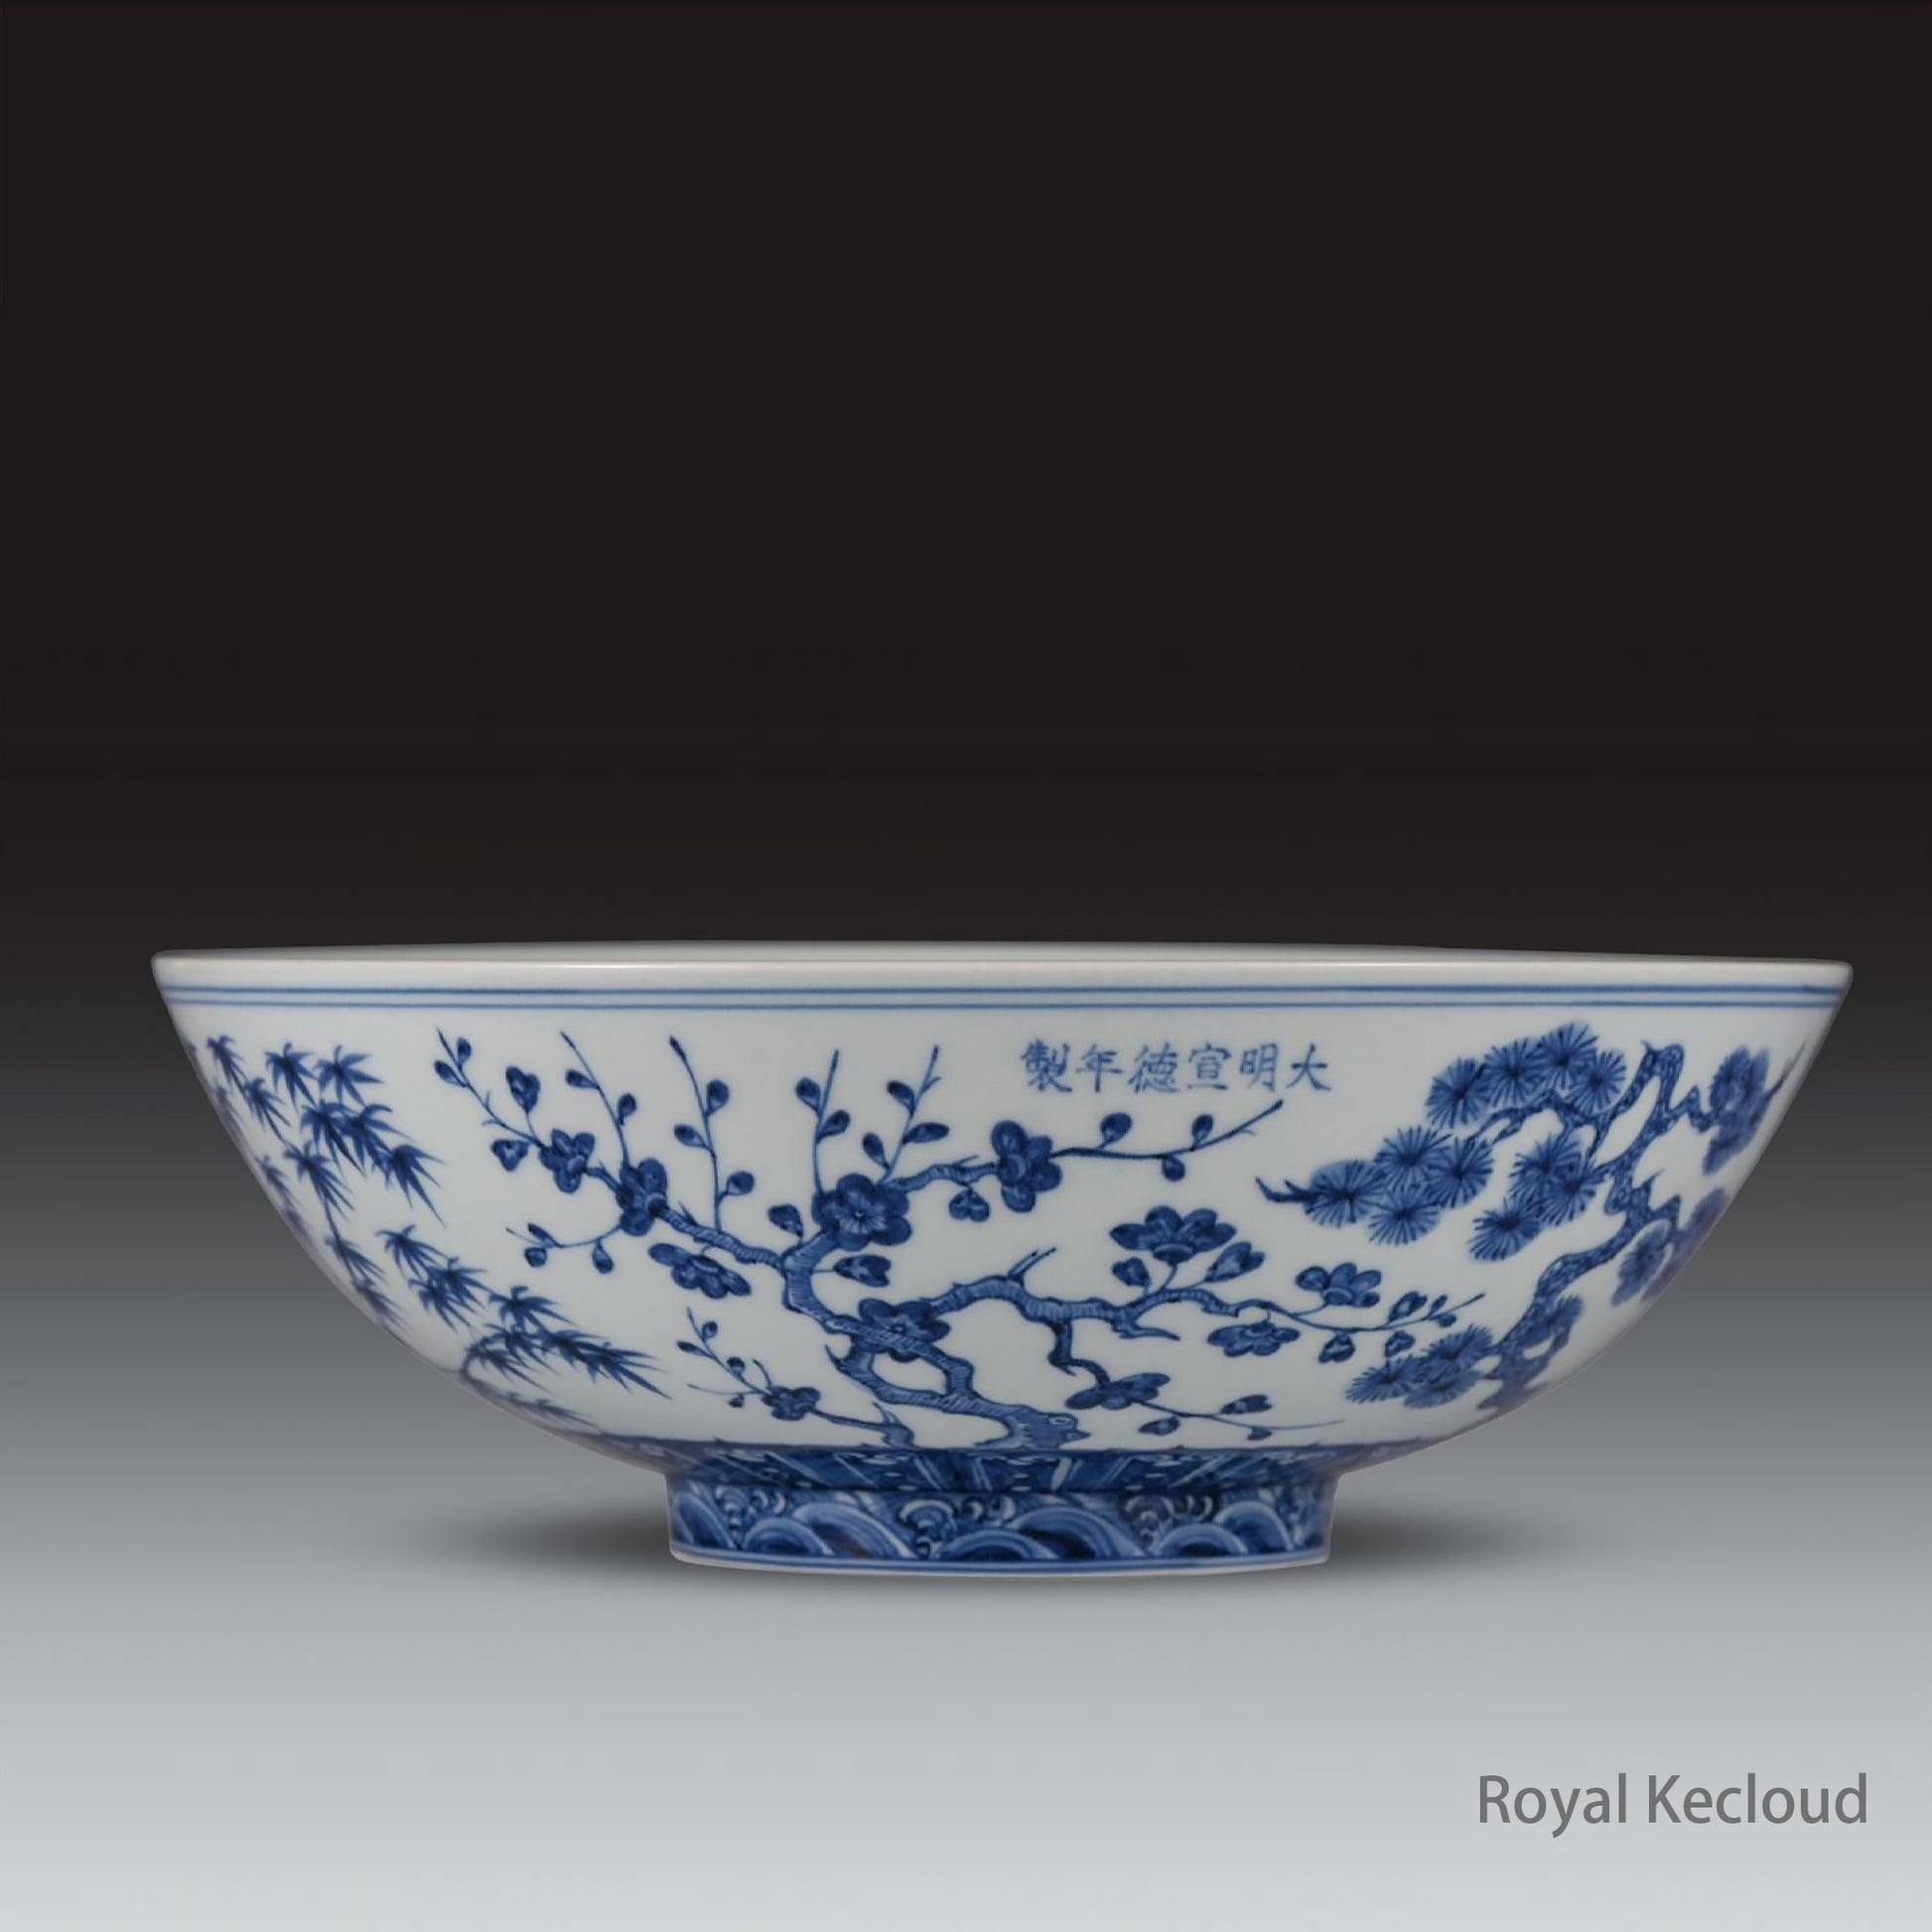 Chinese Ancient Royal Blue and White Porcelain Bowl with Decoration of the "Three Friends"